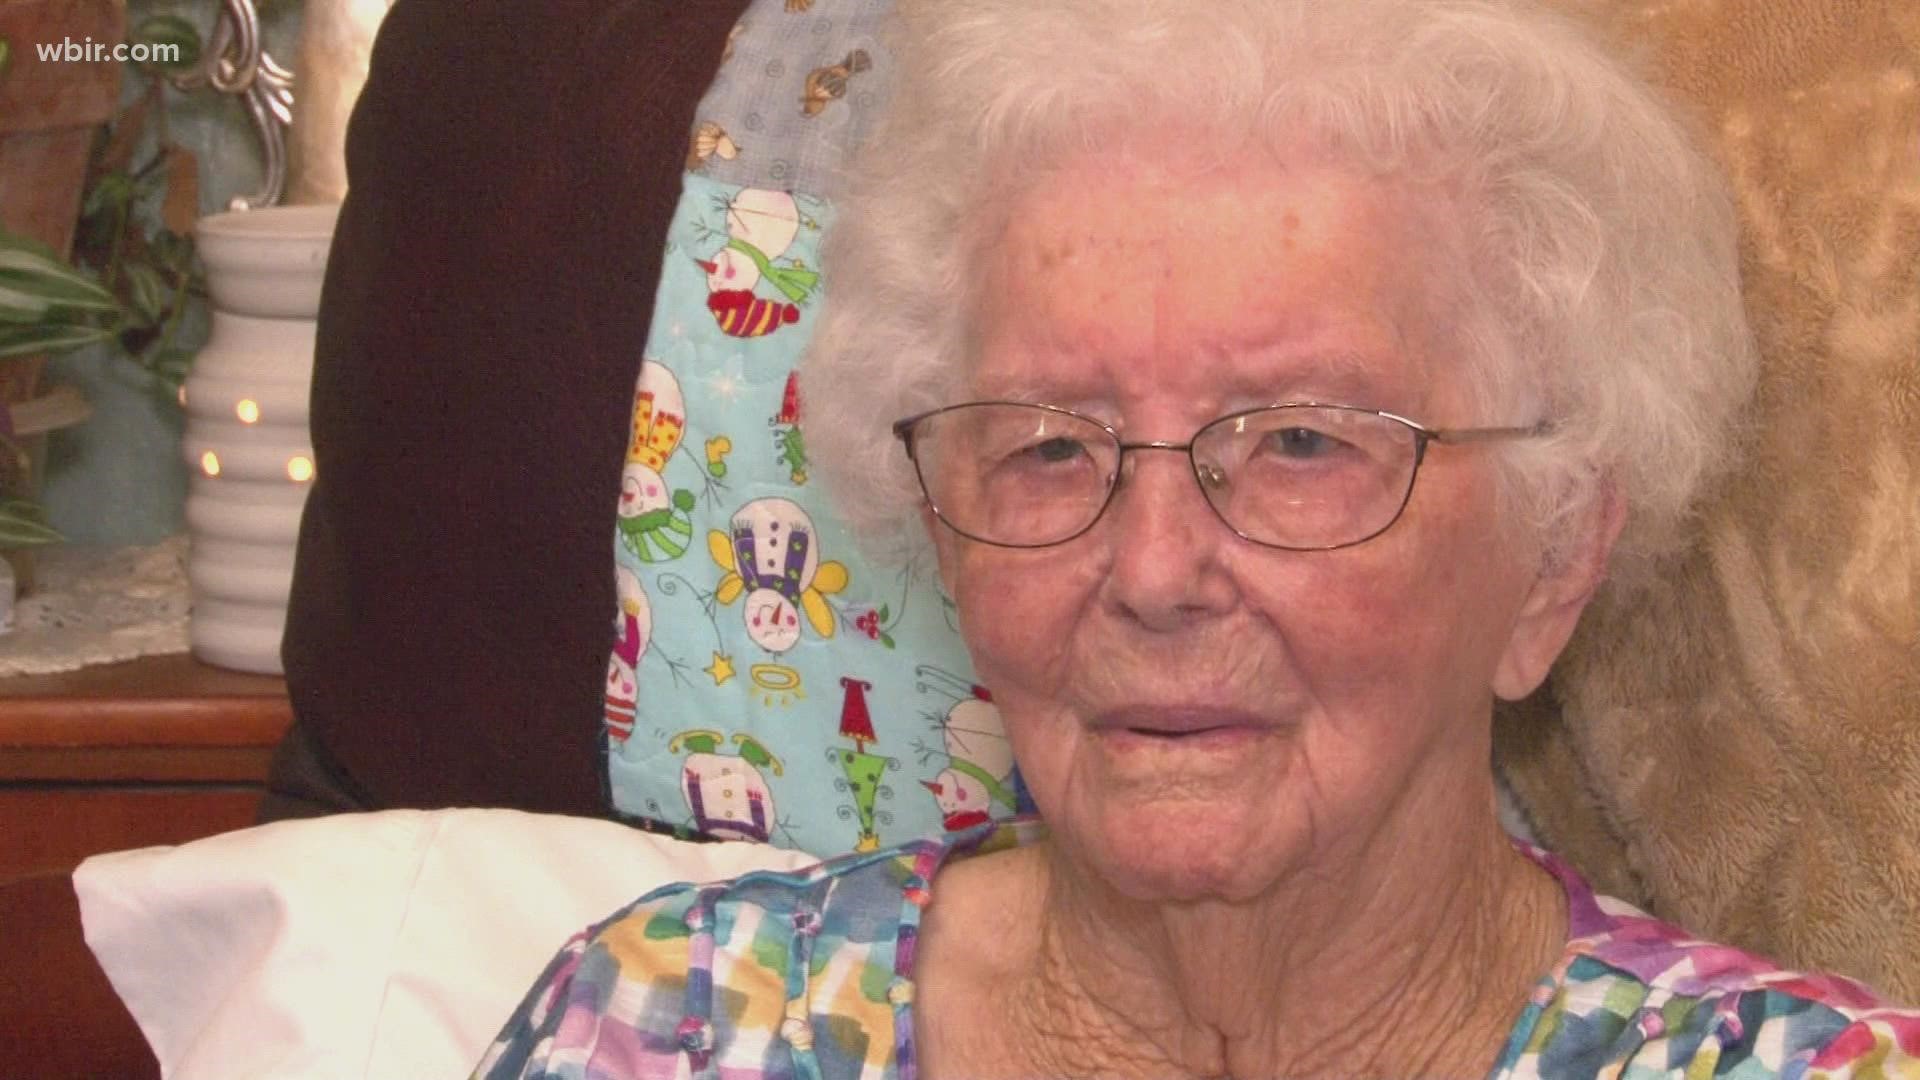 A Roane County woman has lived 56 million minutes and counting, and is now looking back on all the other Thanksgivings she celebrated.